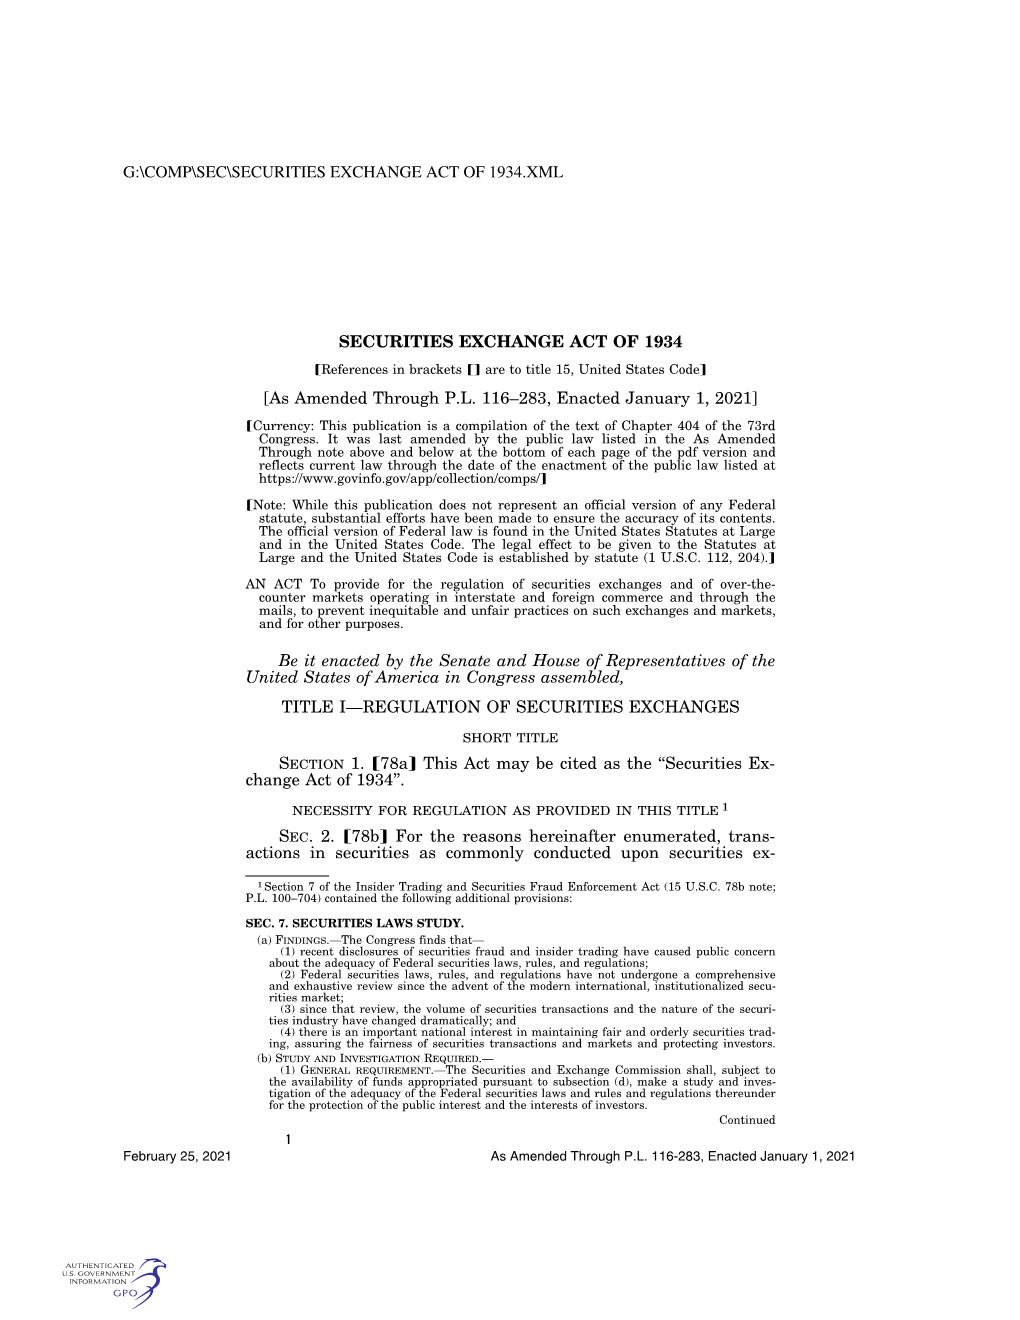 Securities Exchange Act of 1934, As Amended